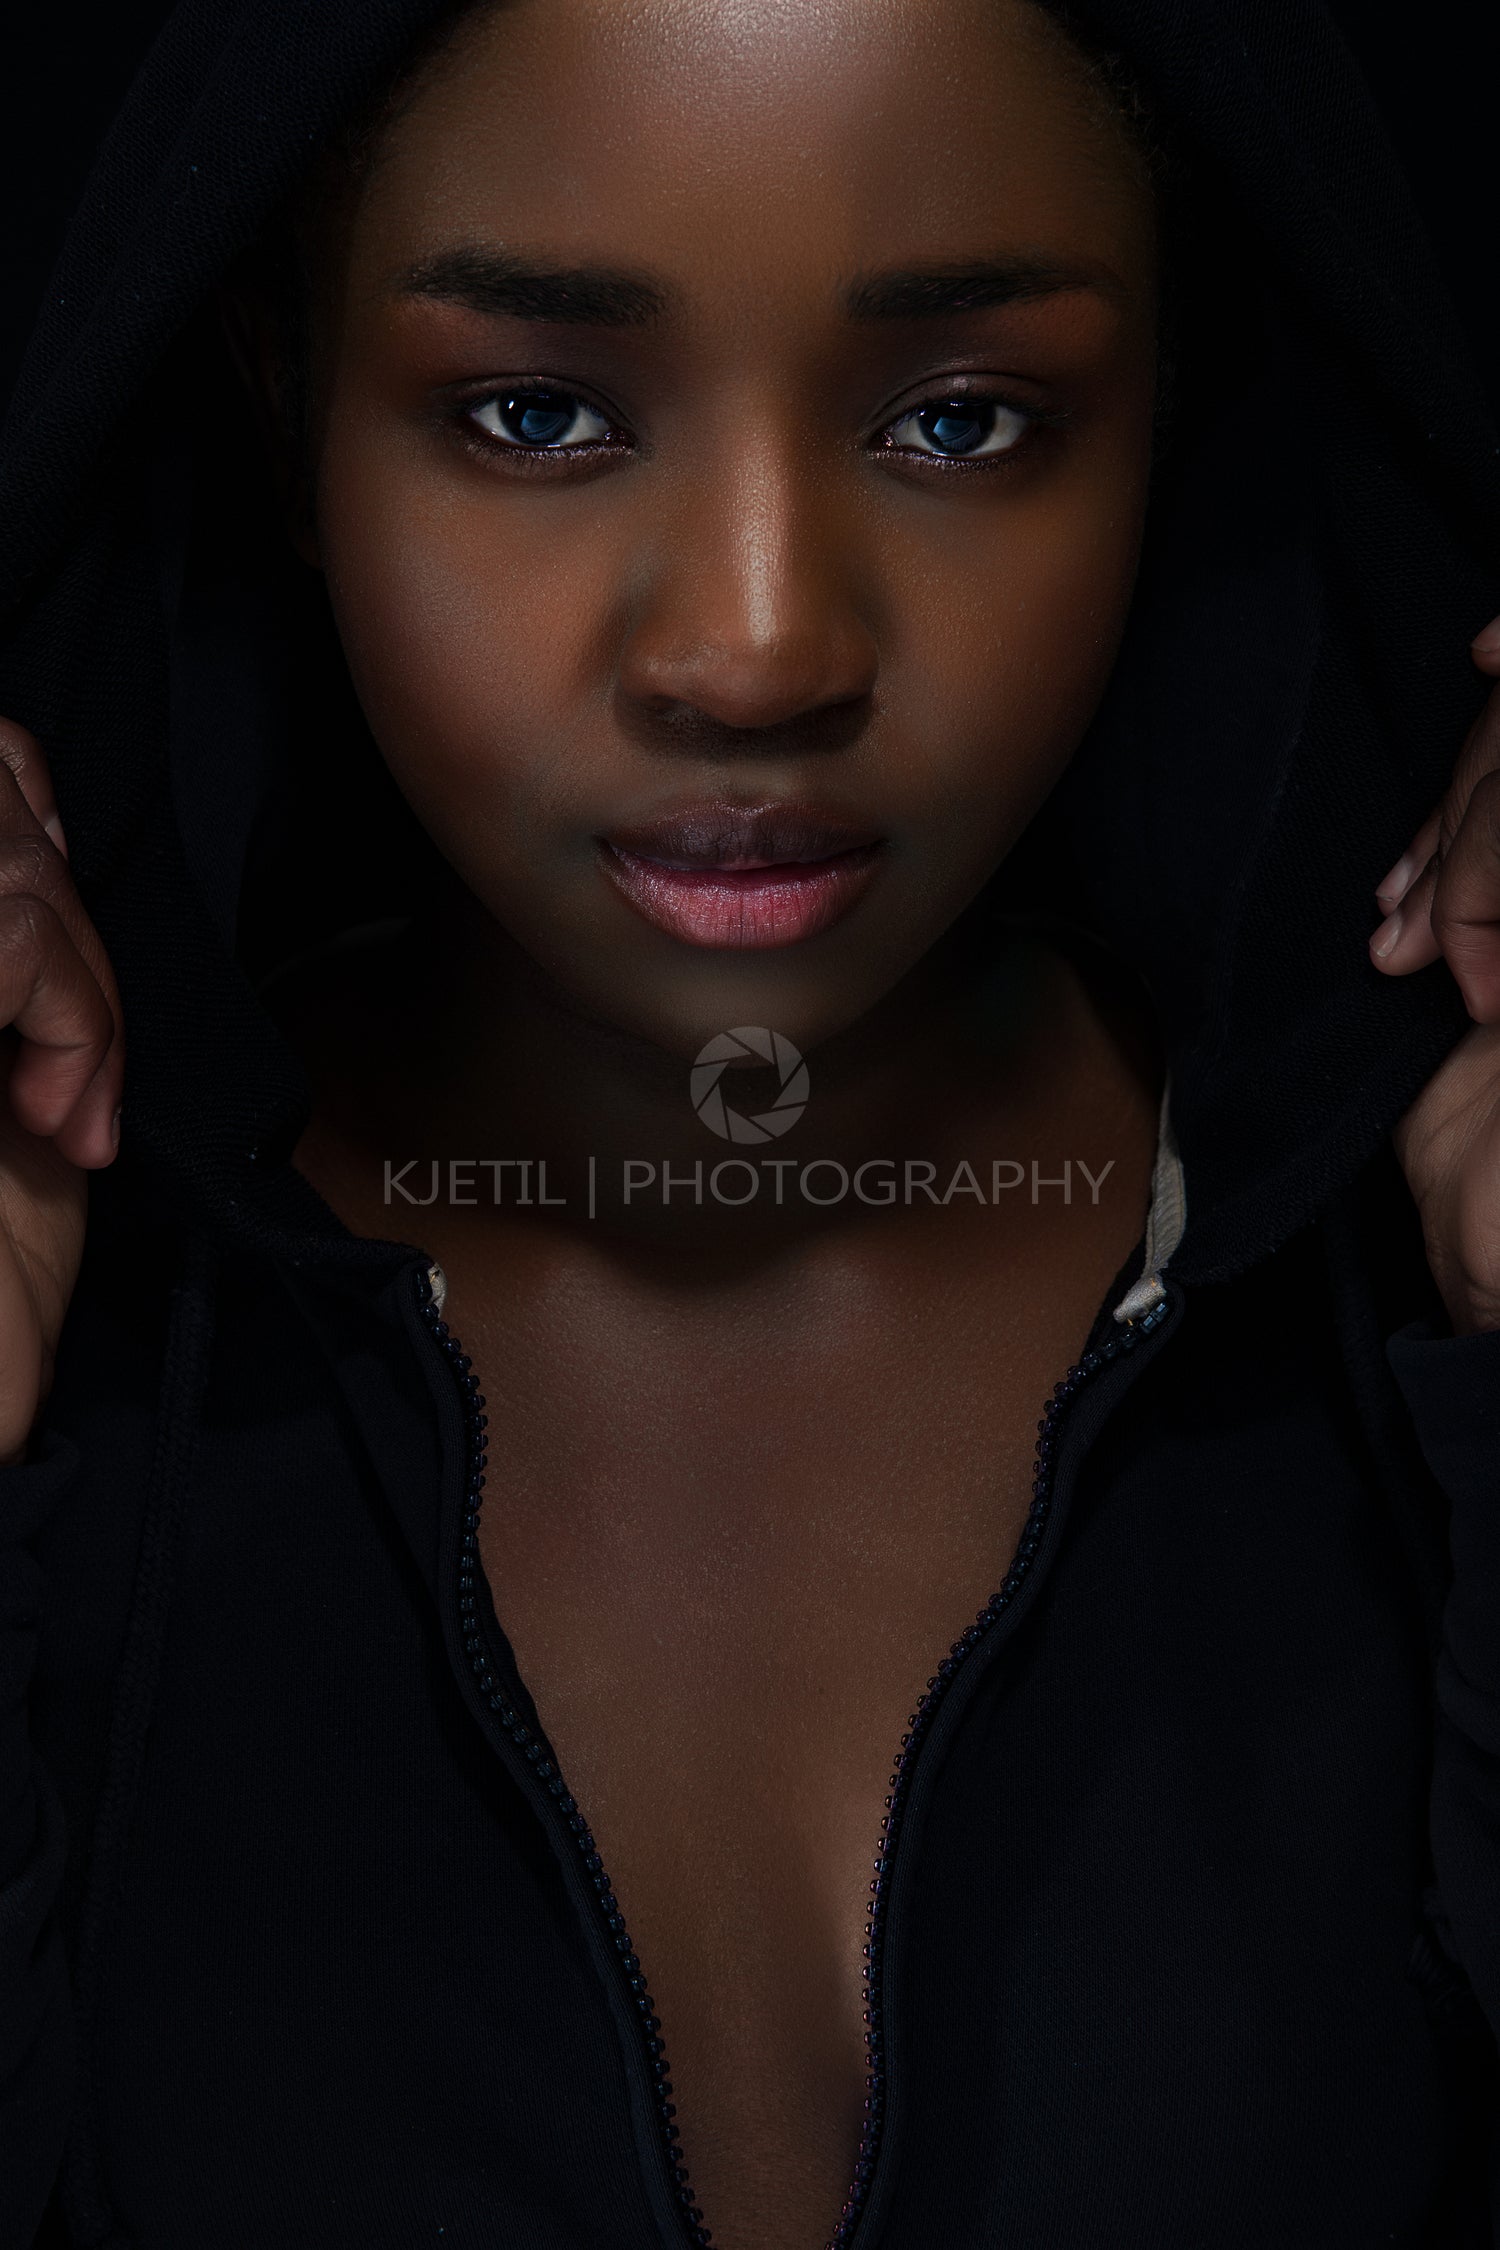 Cool and confident woman with dark skin and attitude wearing hoodie